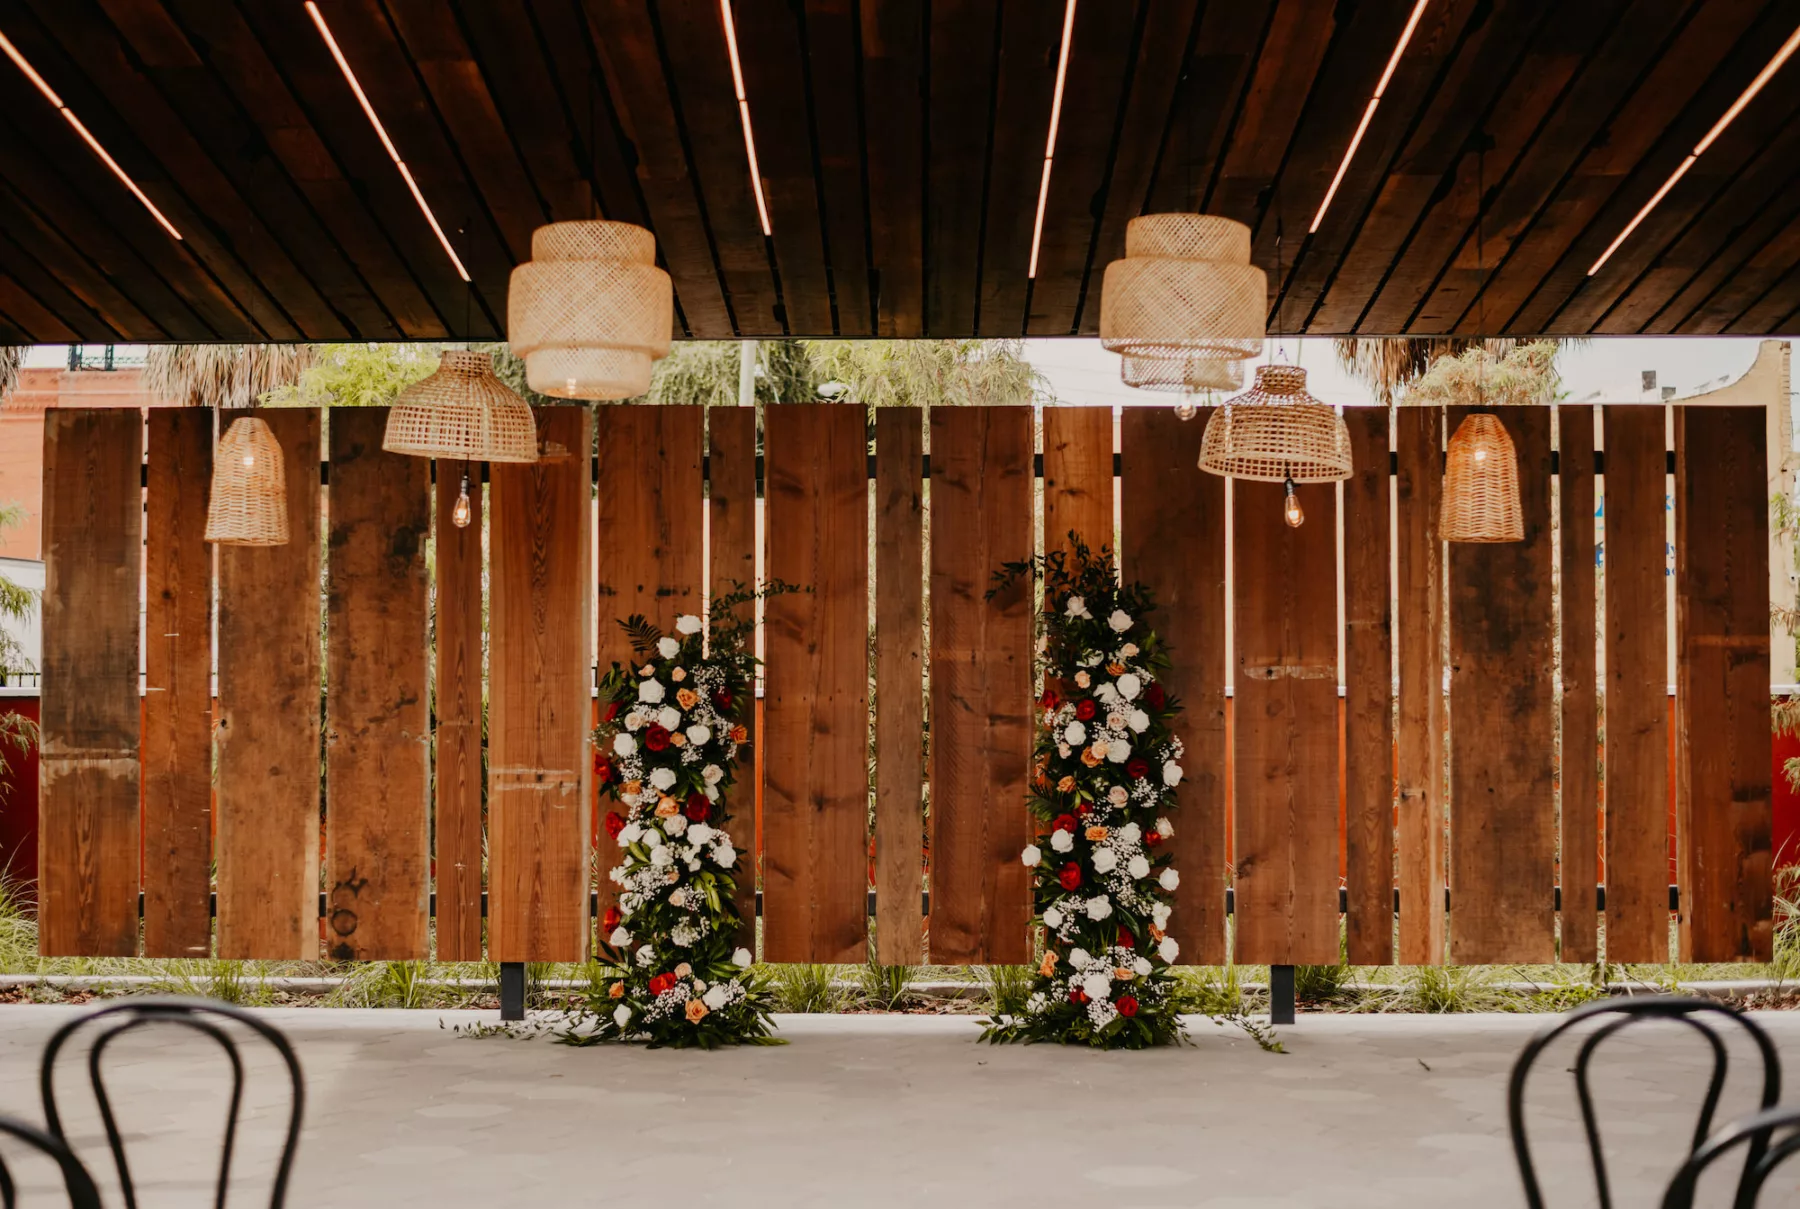 Outdoor Industrial Wedding Ceremony Inspiration | Rattan Light Fixture Ideas | Terracotta, Orange, and White Roses, Baby's Breath, and Greenery Backdrop | Tampa Courtyard Venue J.C. Newman Cigar Co.